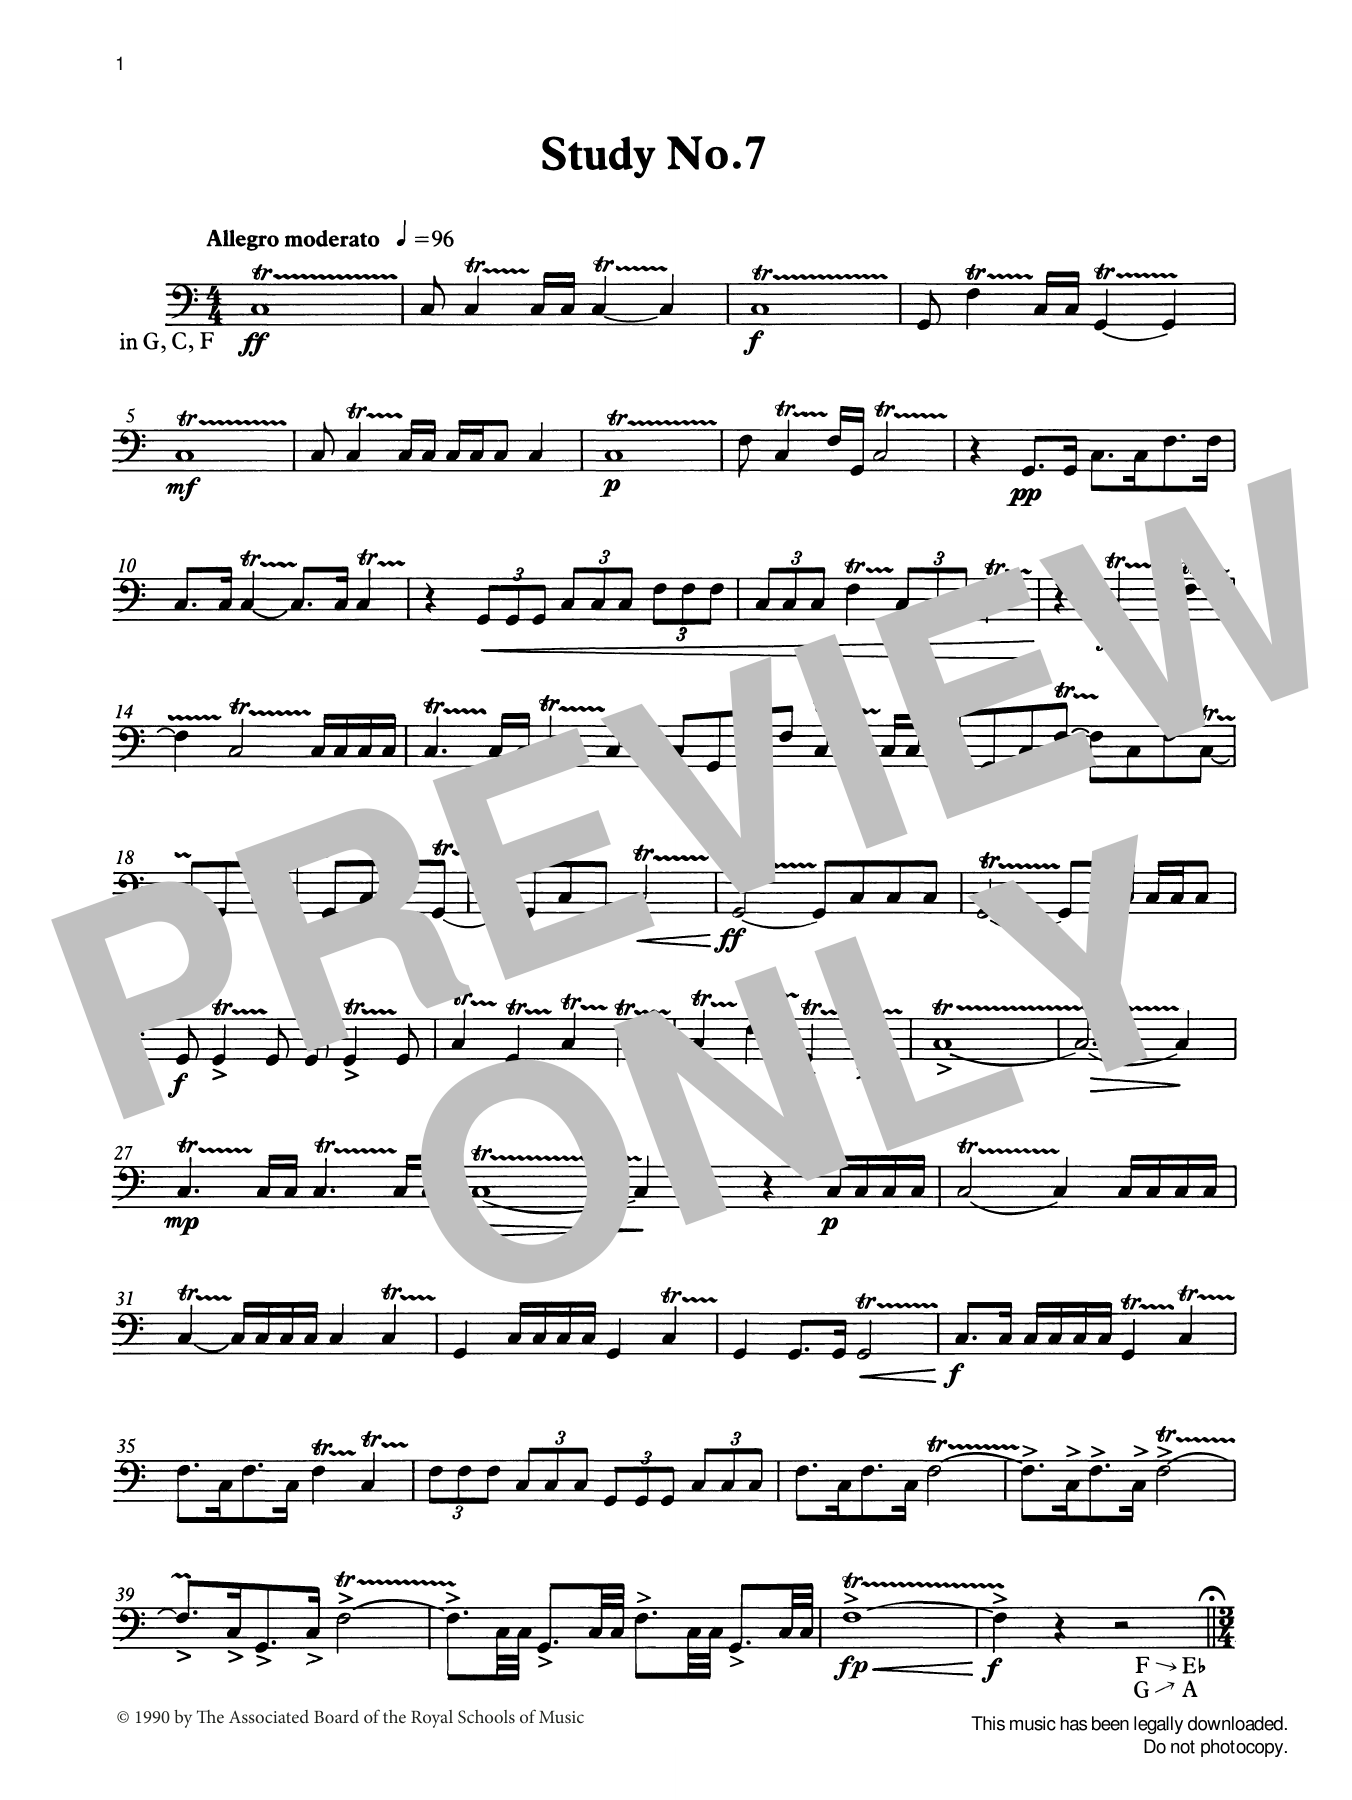 Download Ian Wright Study No.7 from Graded Music for Timpan Sheet Music